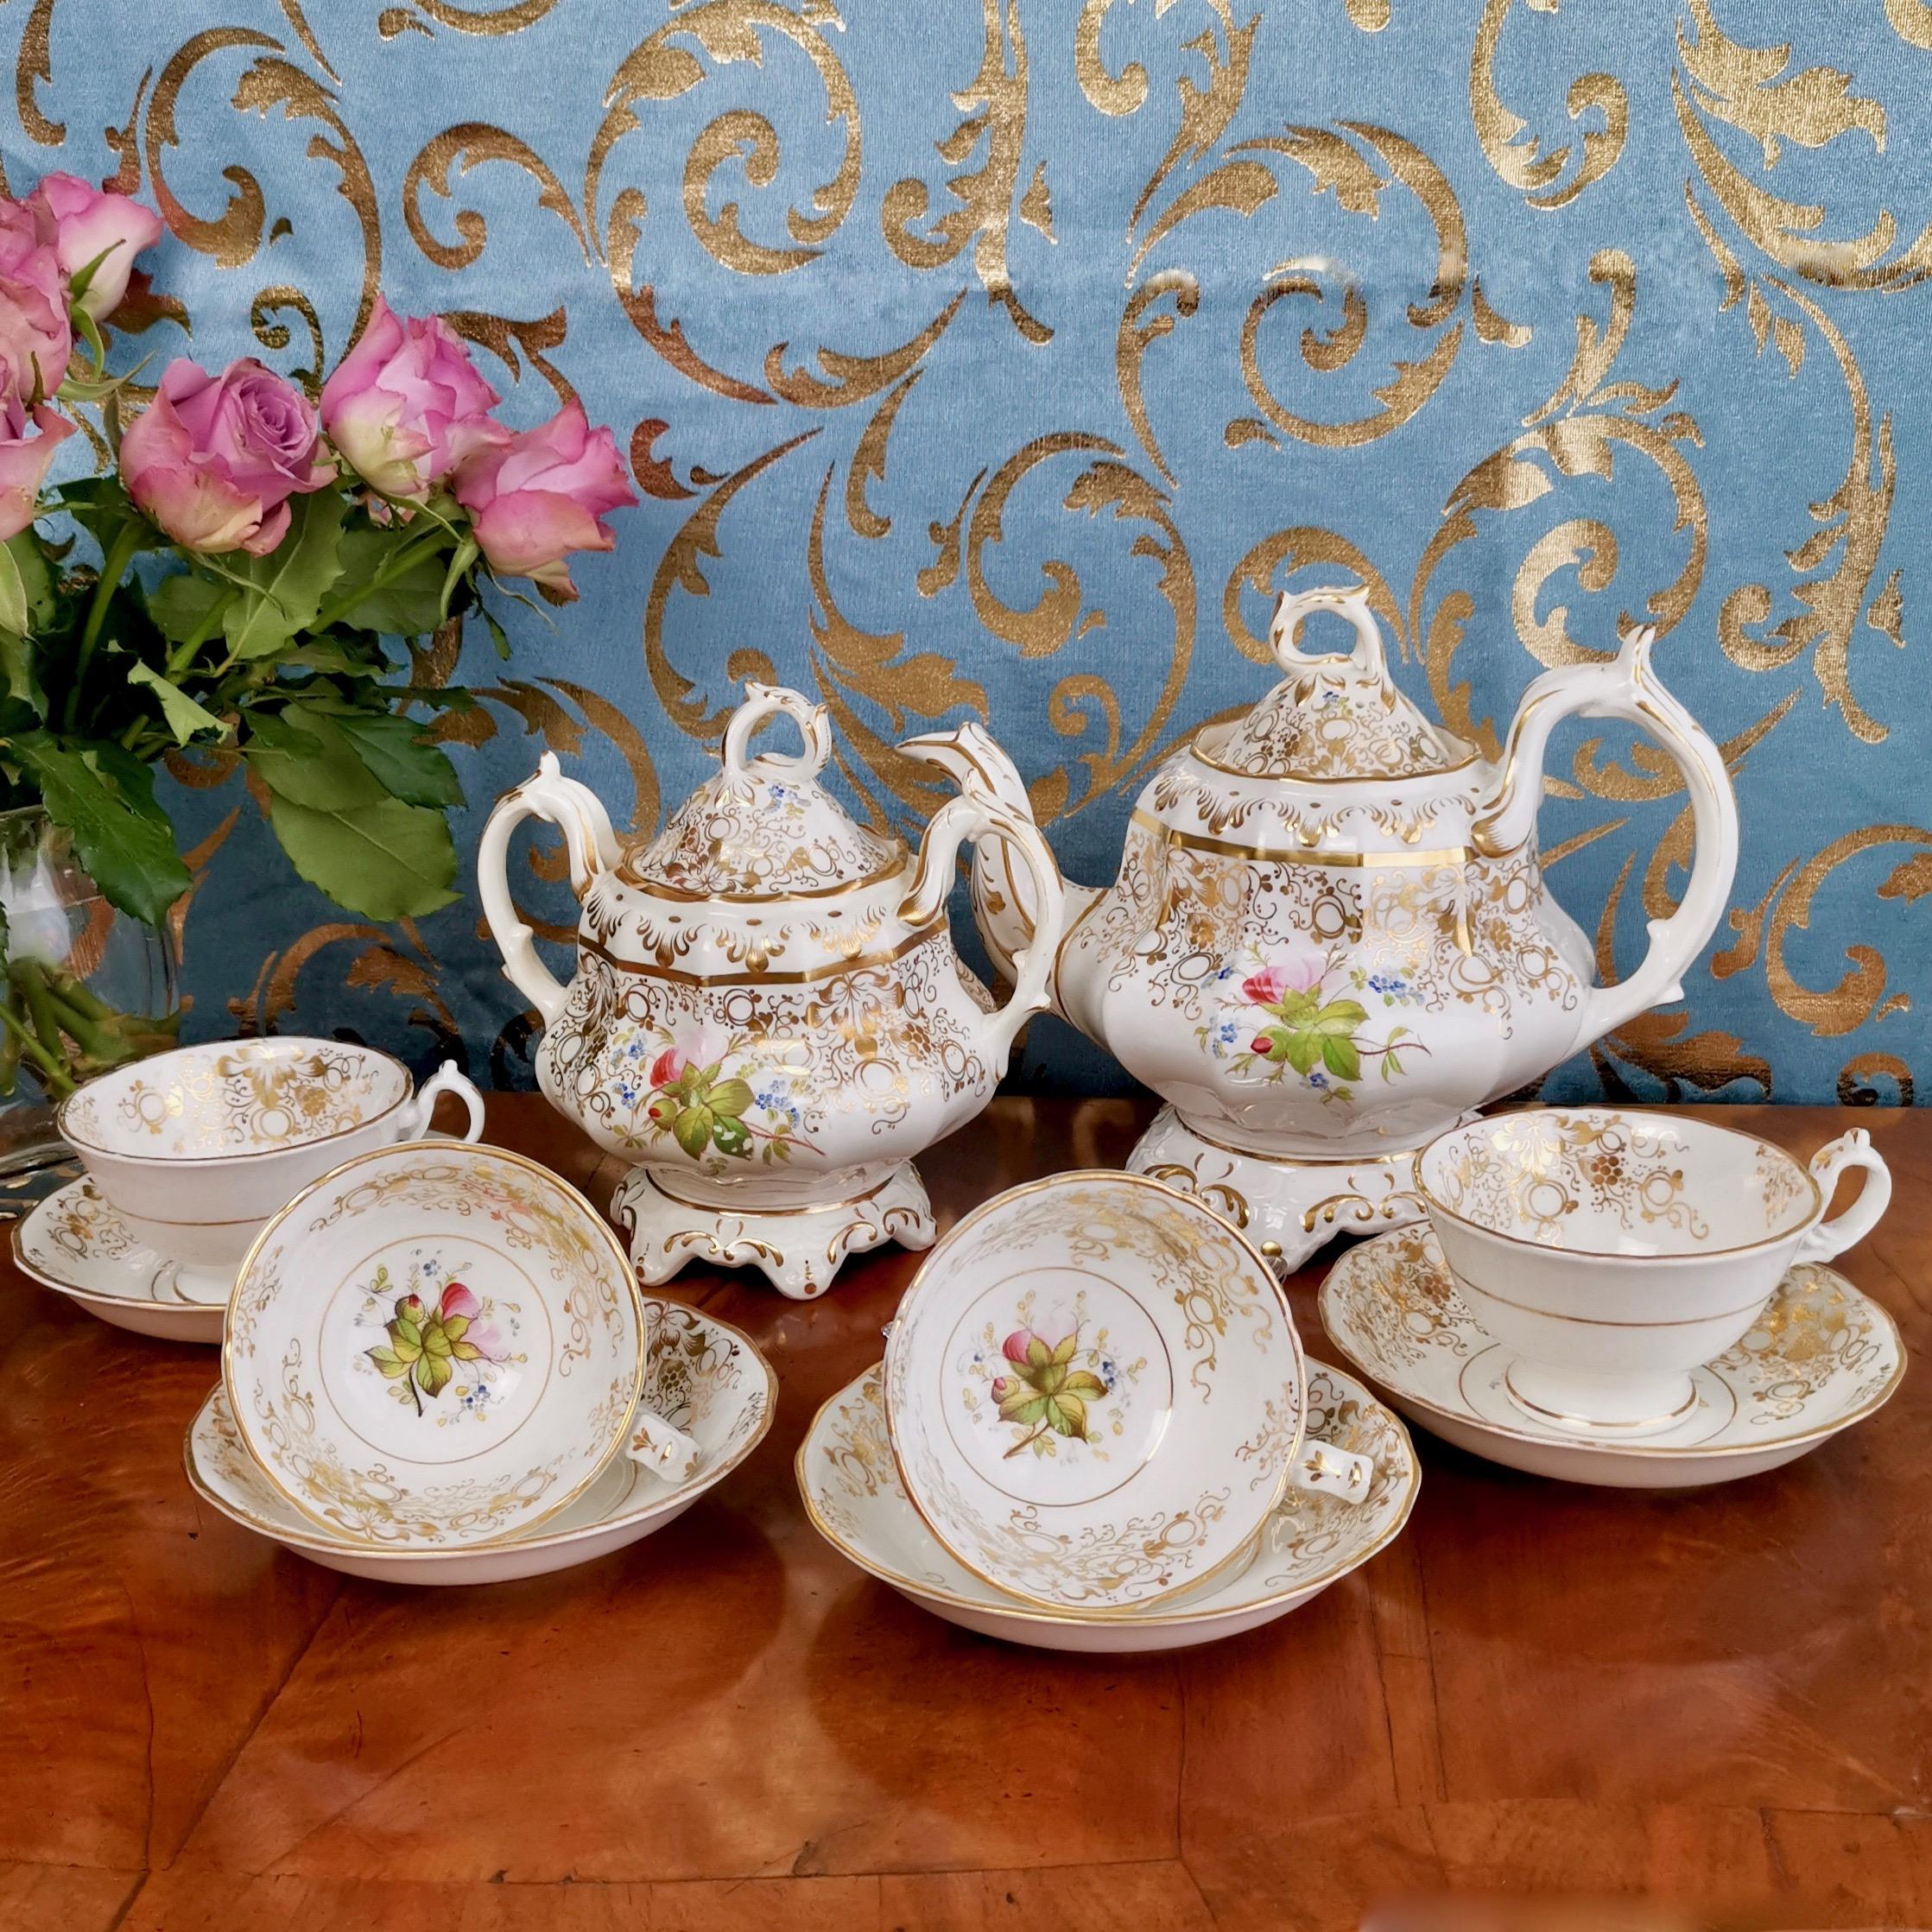 This is a beautiful part porcelain tea service from an unknown Staffordshire maker, produced in circa 1845 in the Rococo Revival style. It is white with beautiful gilt decorations and hand painted flowers. The set has some flaws and comes As Found